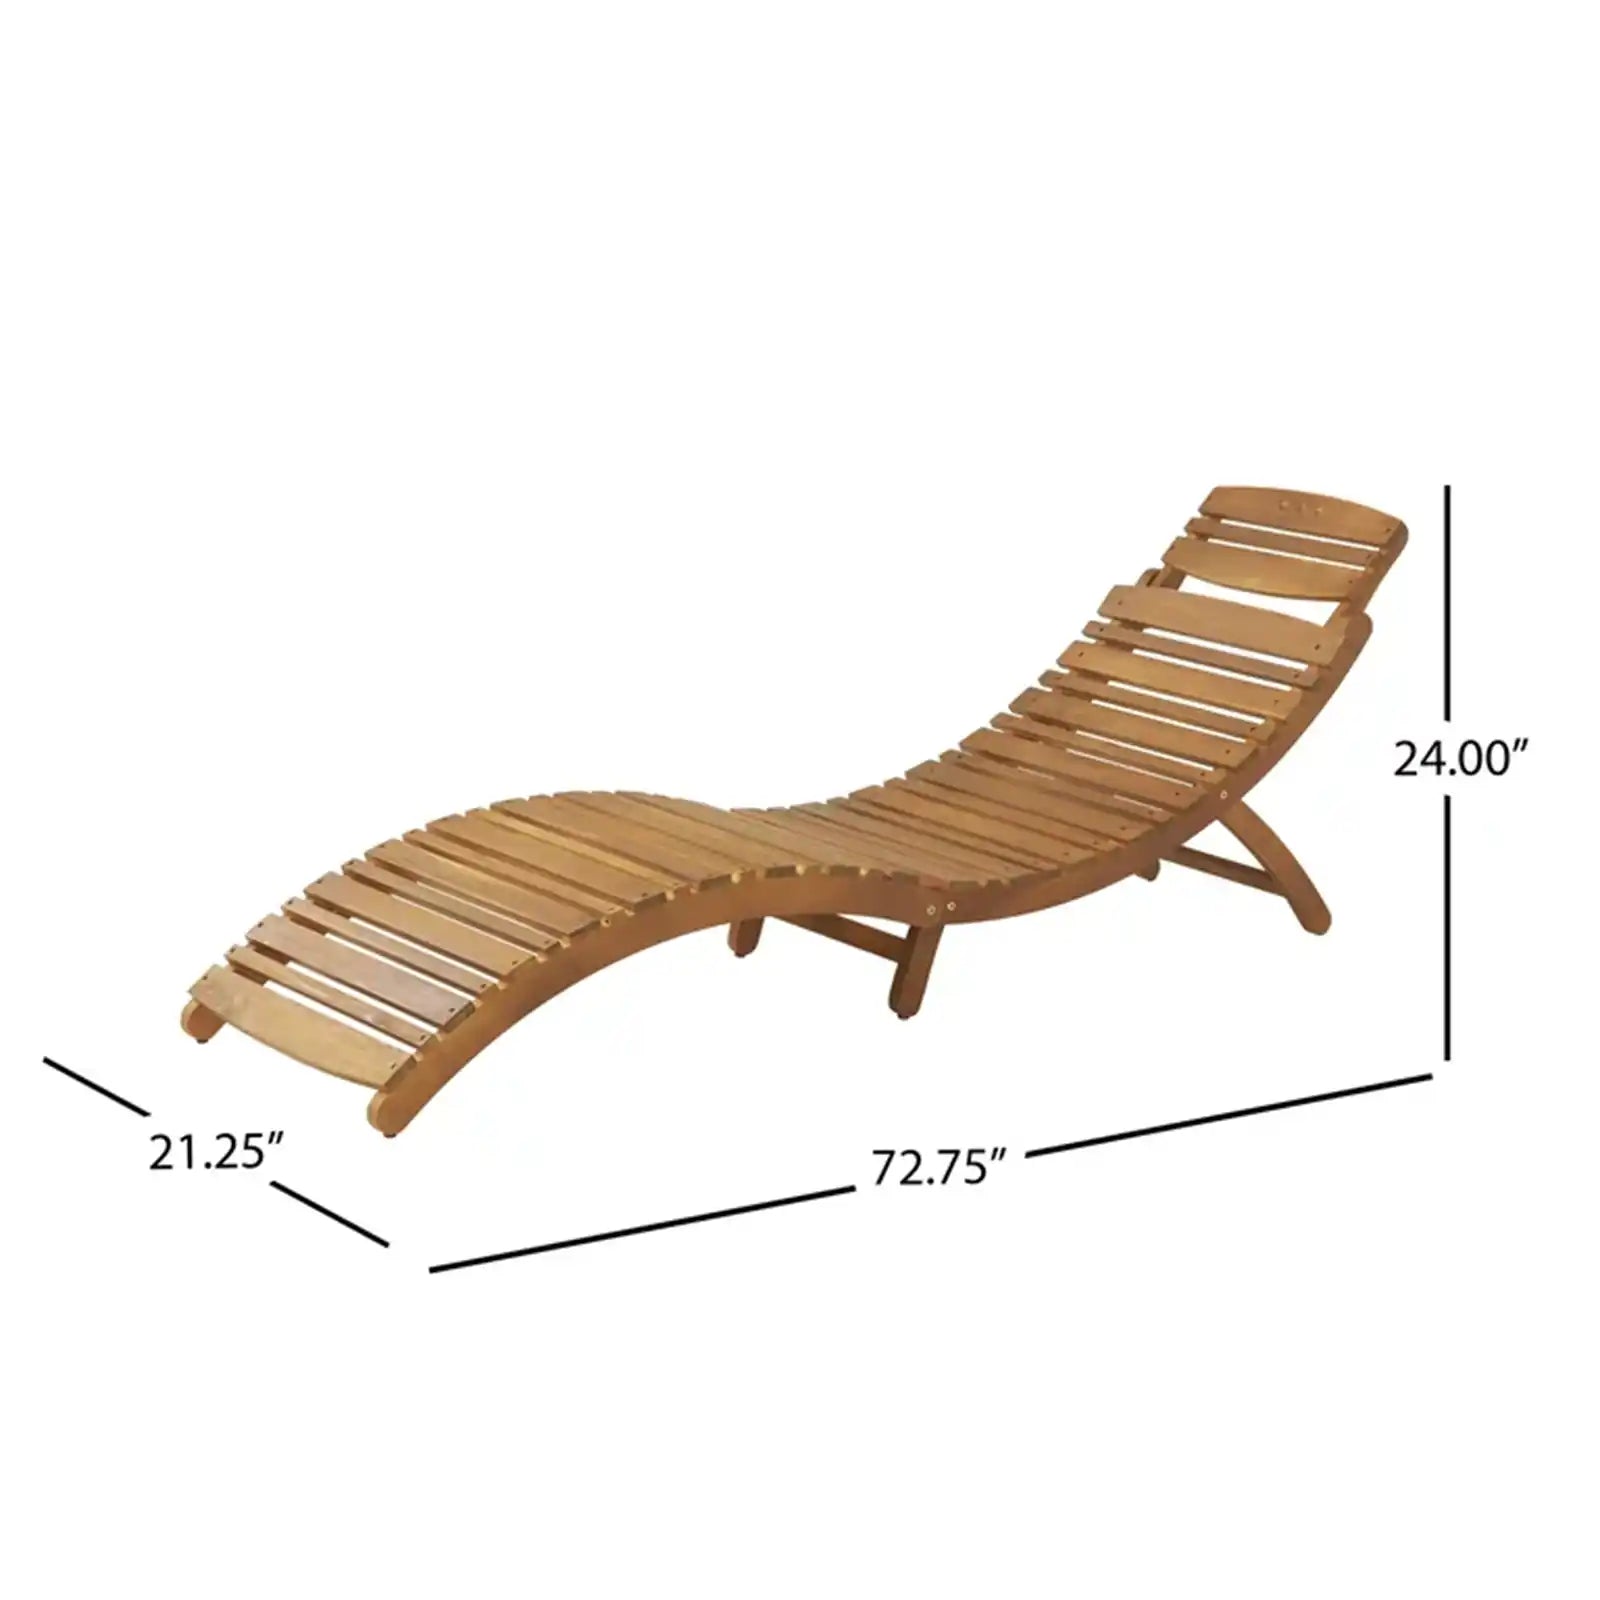 Wood Outdoor Chaise Lounge, Natural Brown